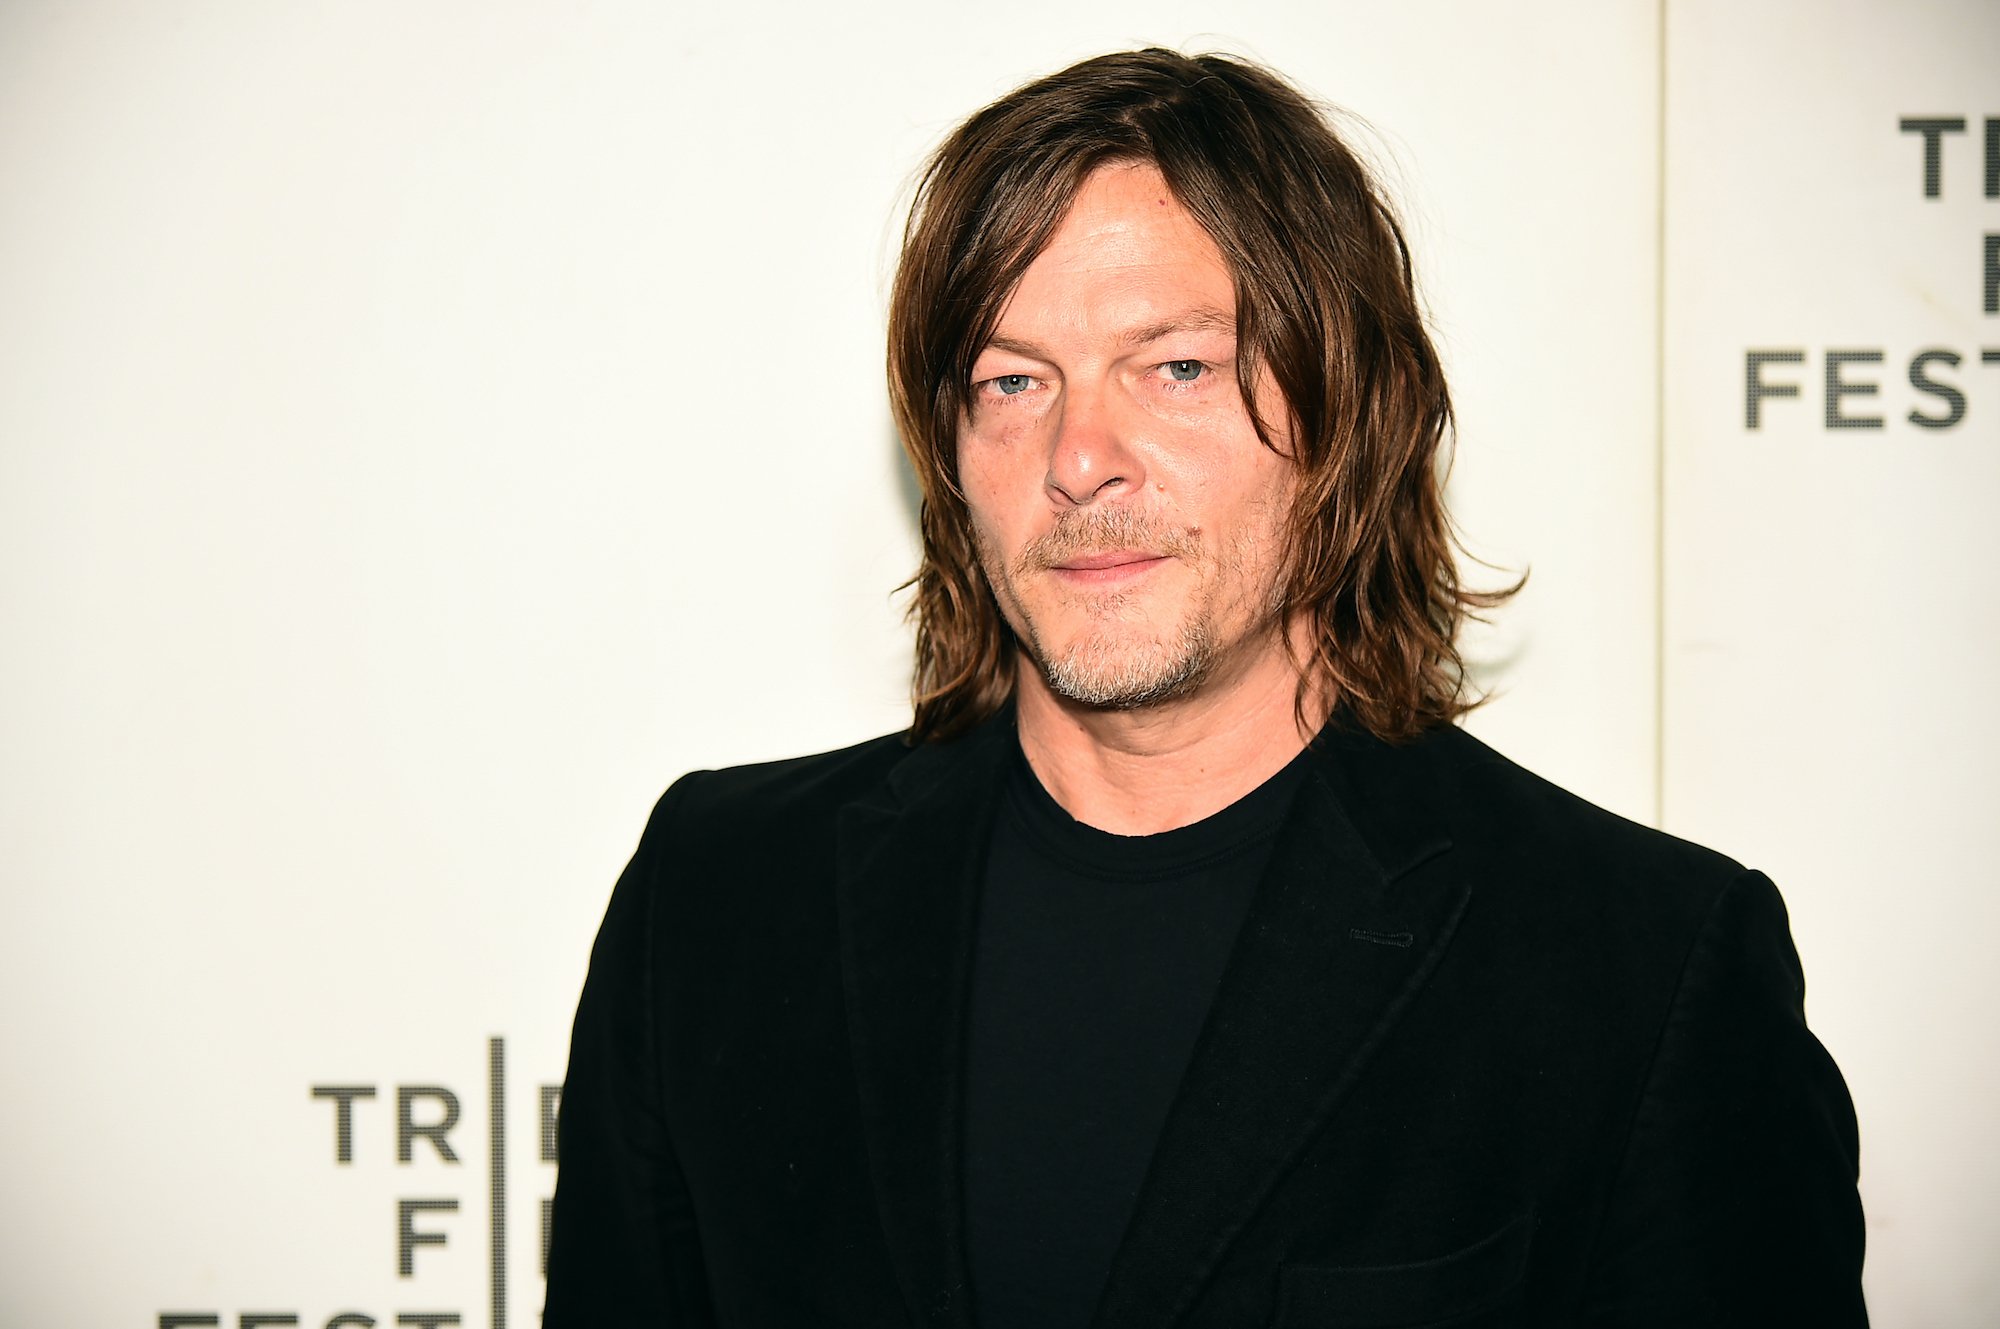 Norman Reedus in front of a white background